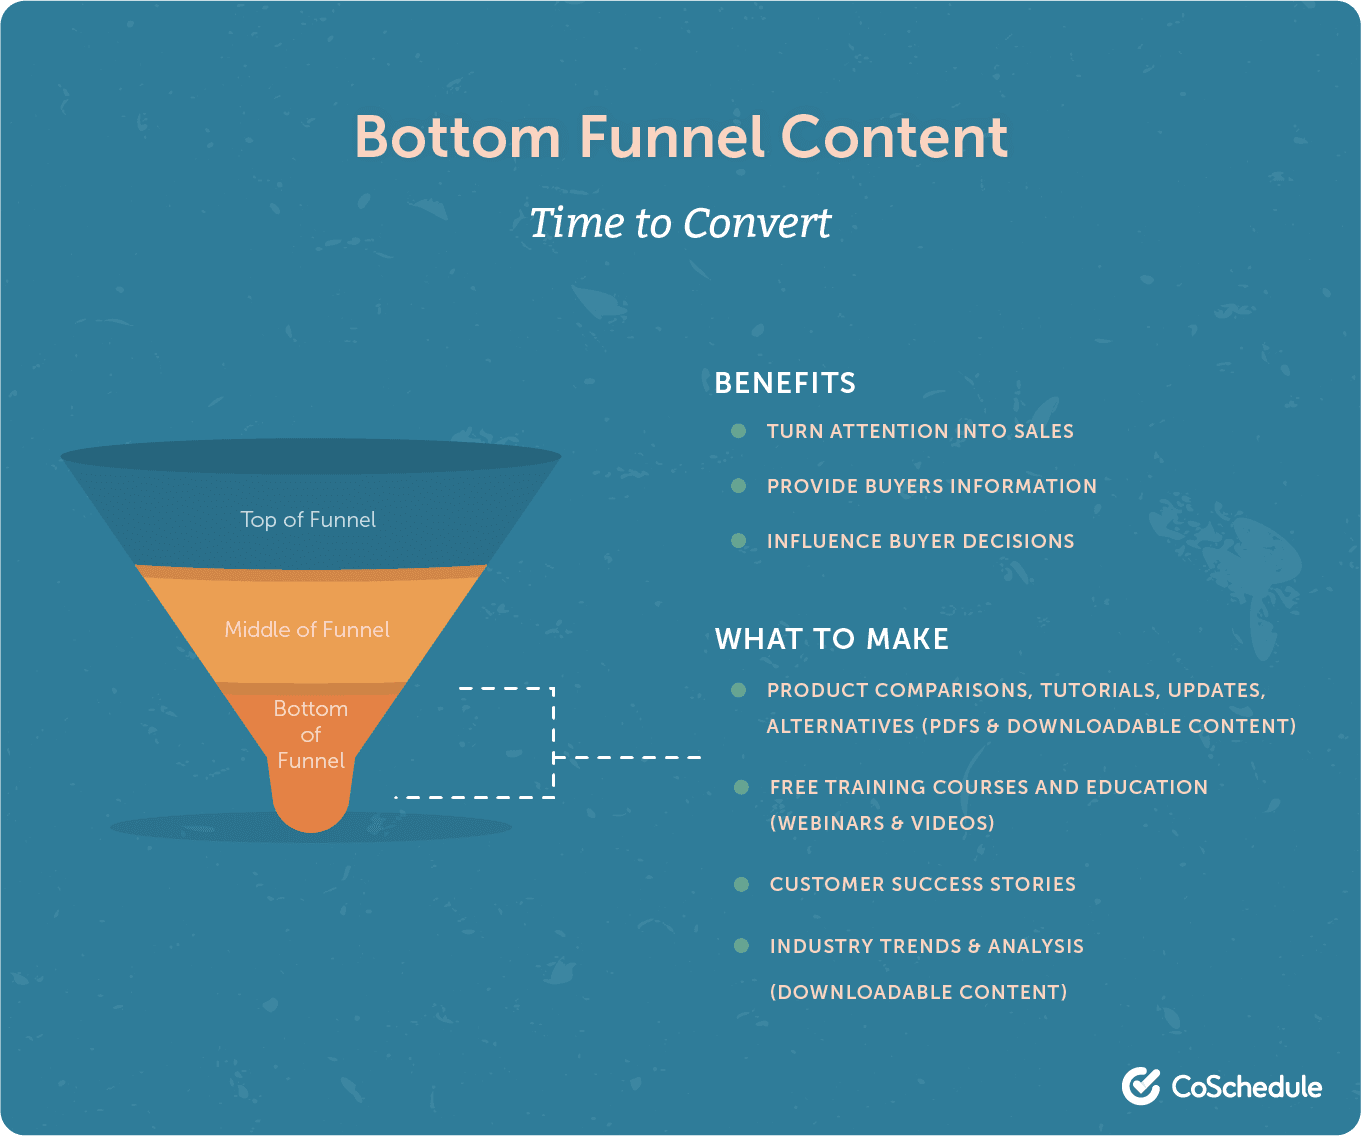 Bottom funnel content